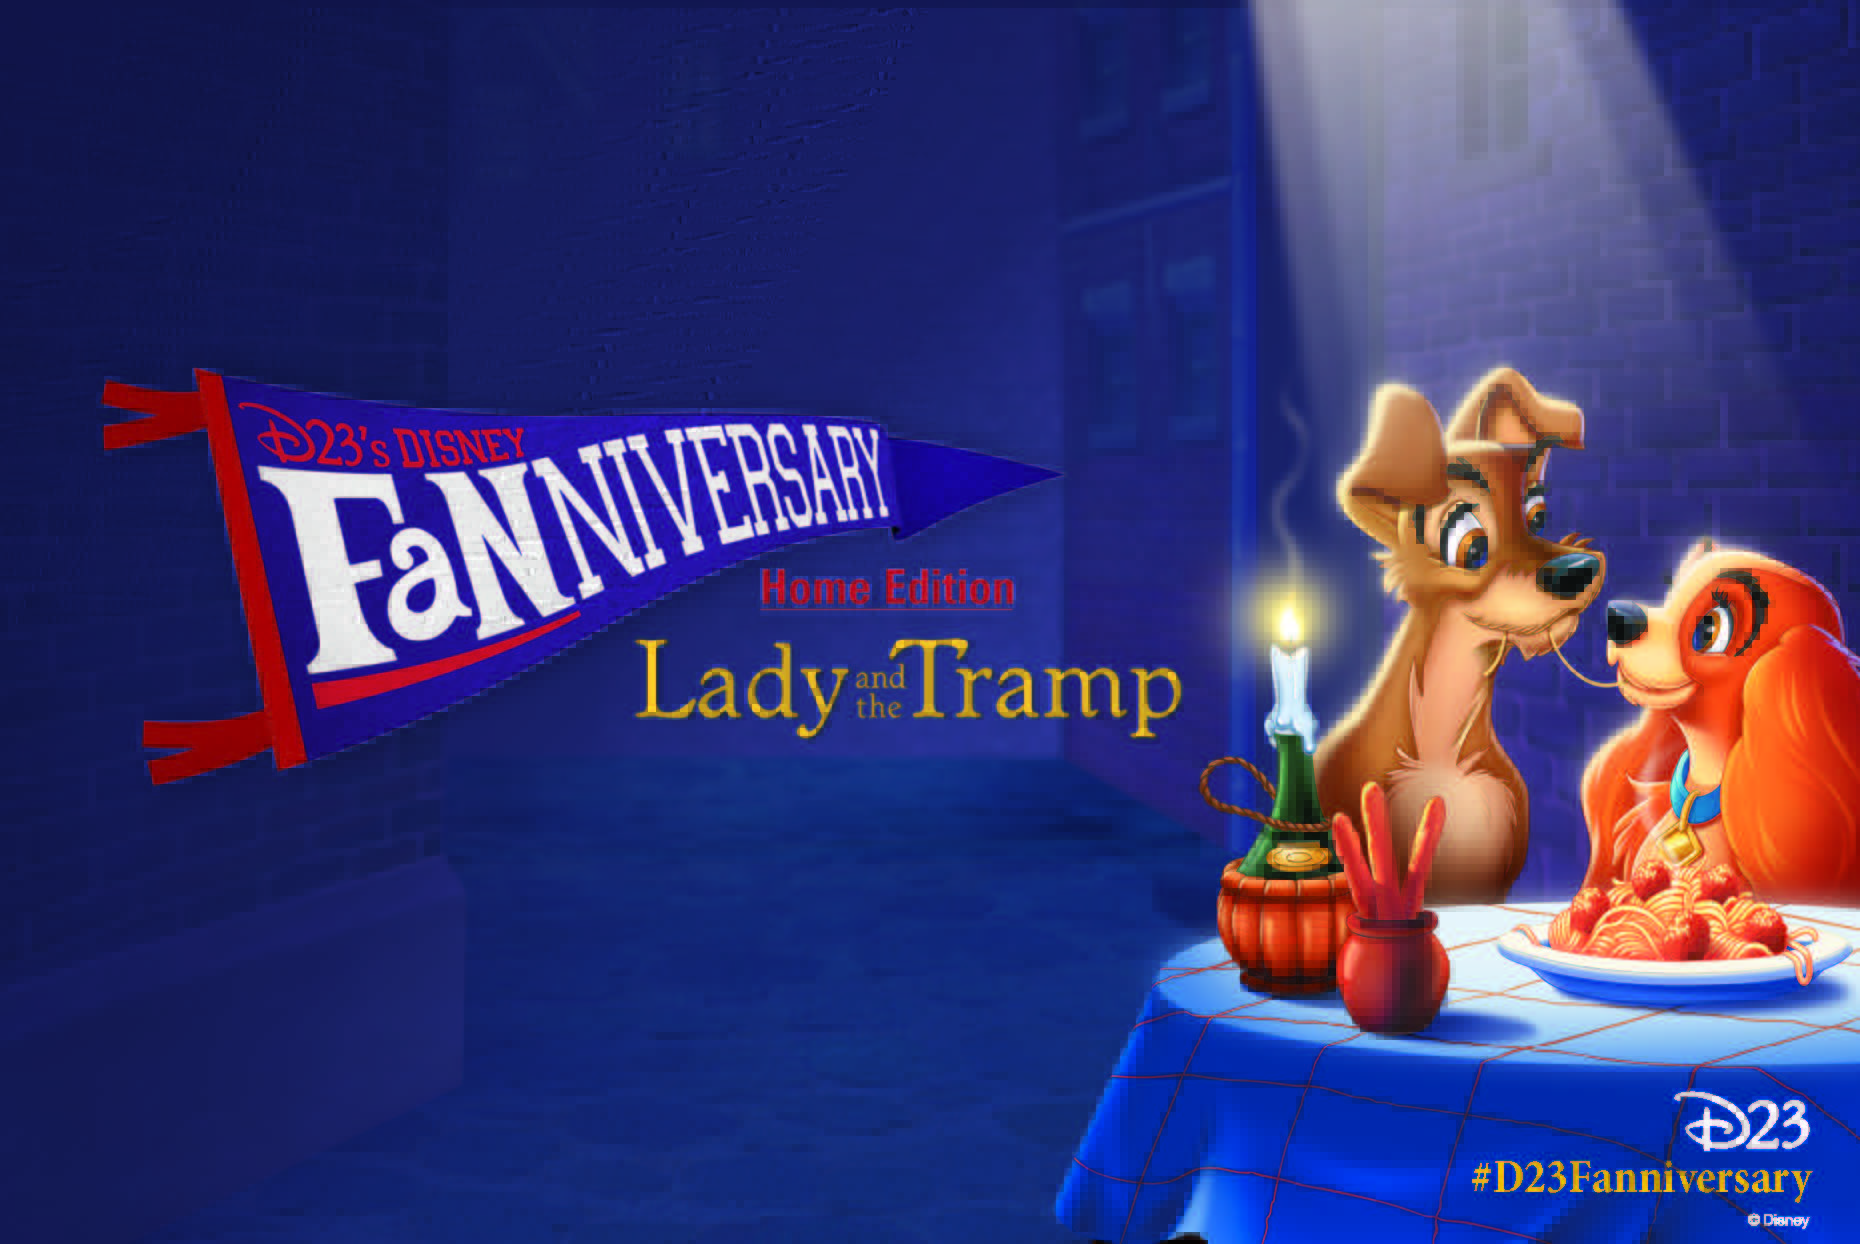 D23 to Feature First In Home Fanniversary Event Celebrating Lady and the Tramp